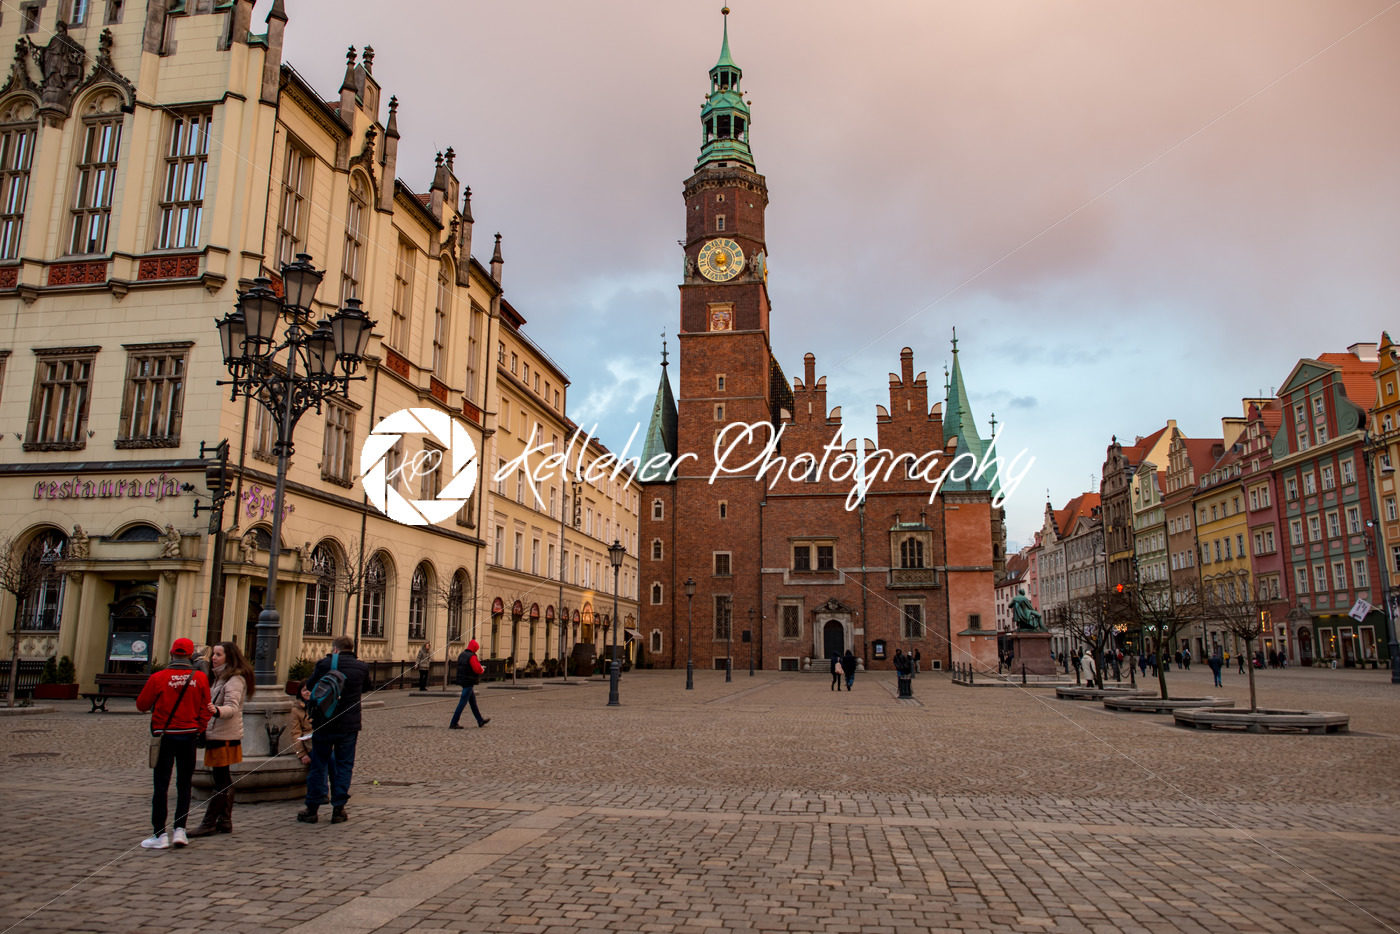 Wroclaw, Poland – March 8, 2018: Wroclaw Town Hall clock tower in evening in historic capital of Silesia, Poland, Europe. - Kelleher Photography Store